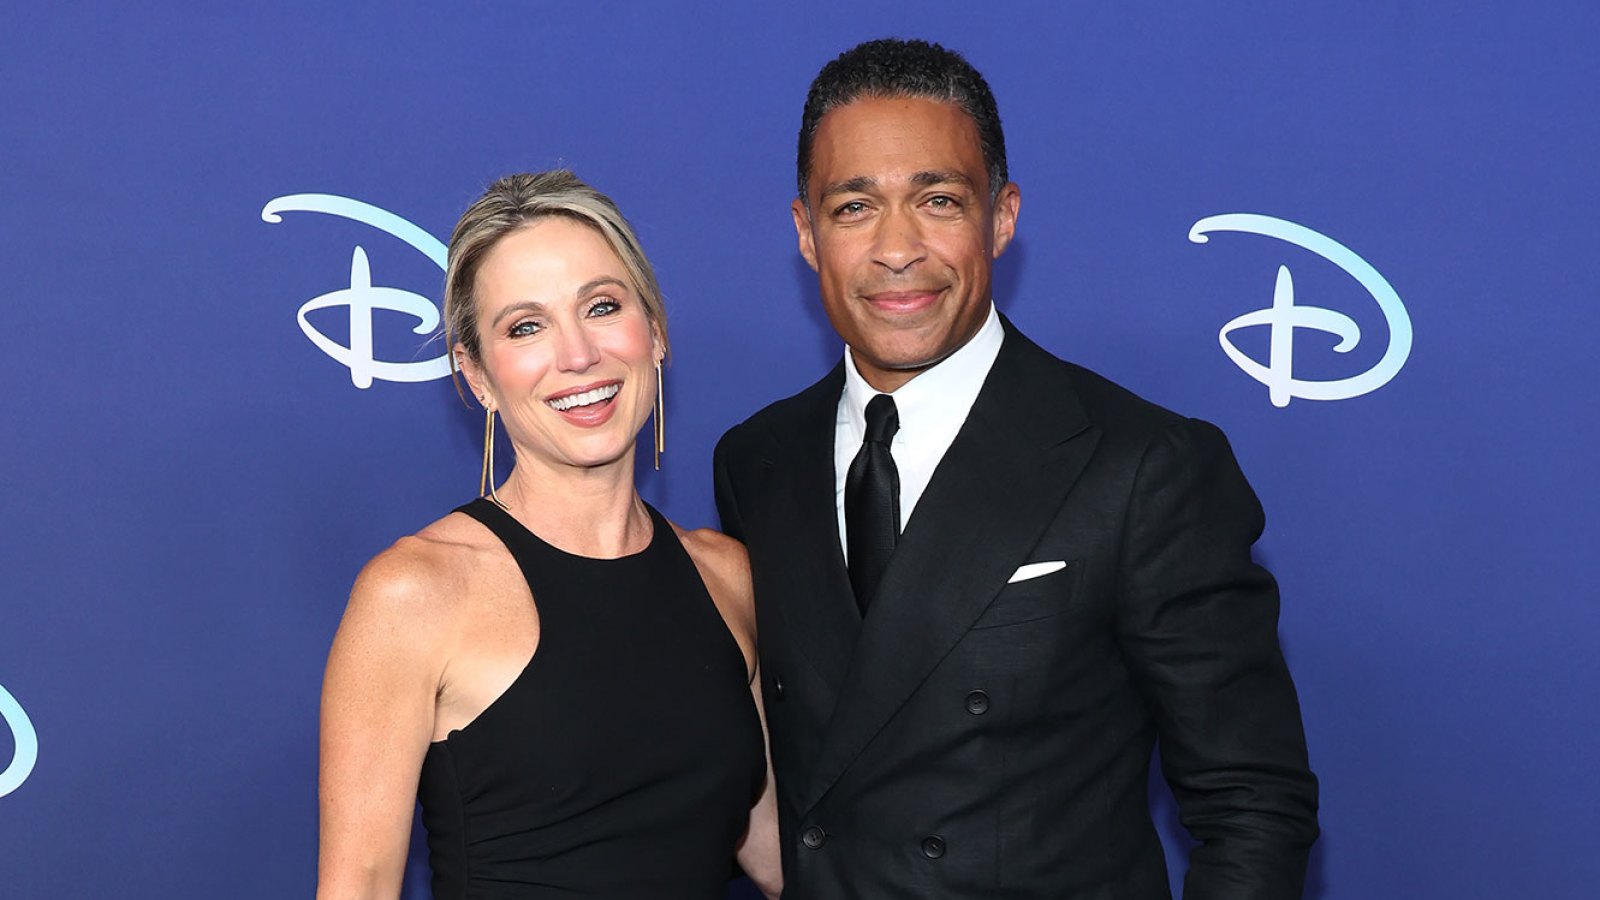 TJ Holmes Hints He Amy Robach Not Allowed at Disney Parks After Drama